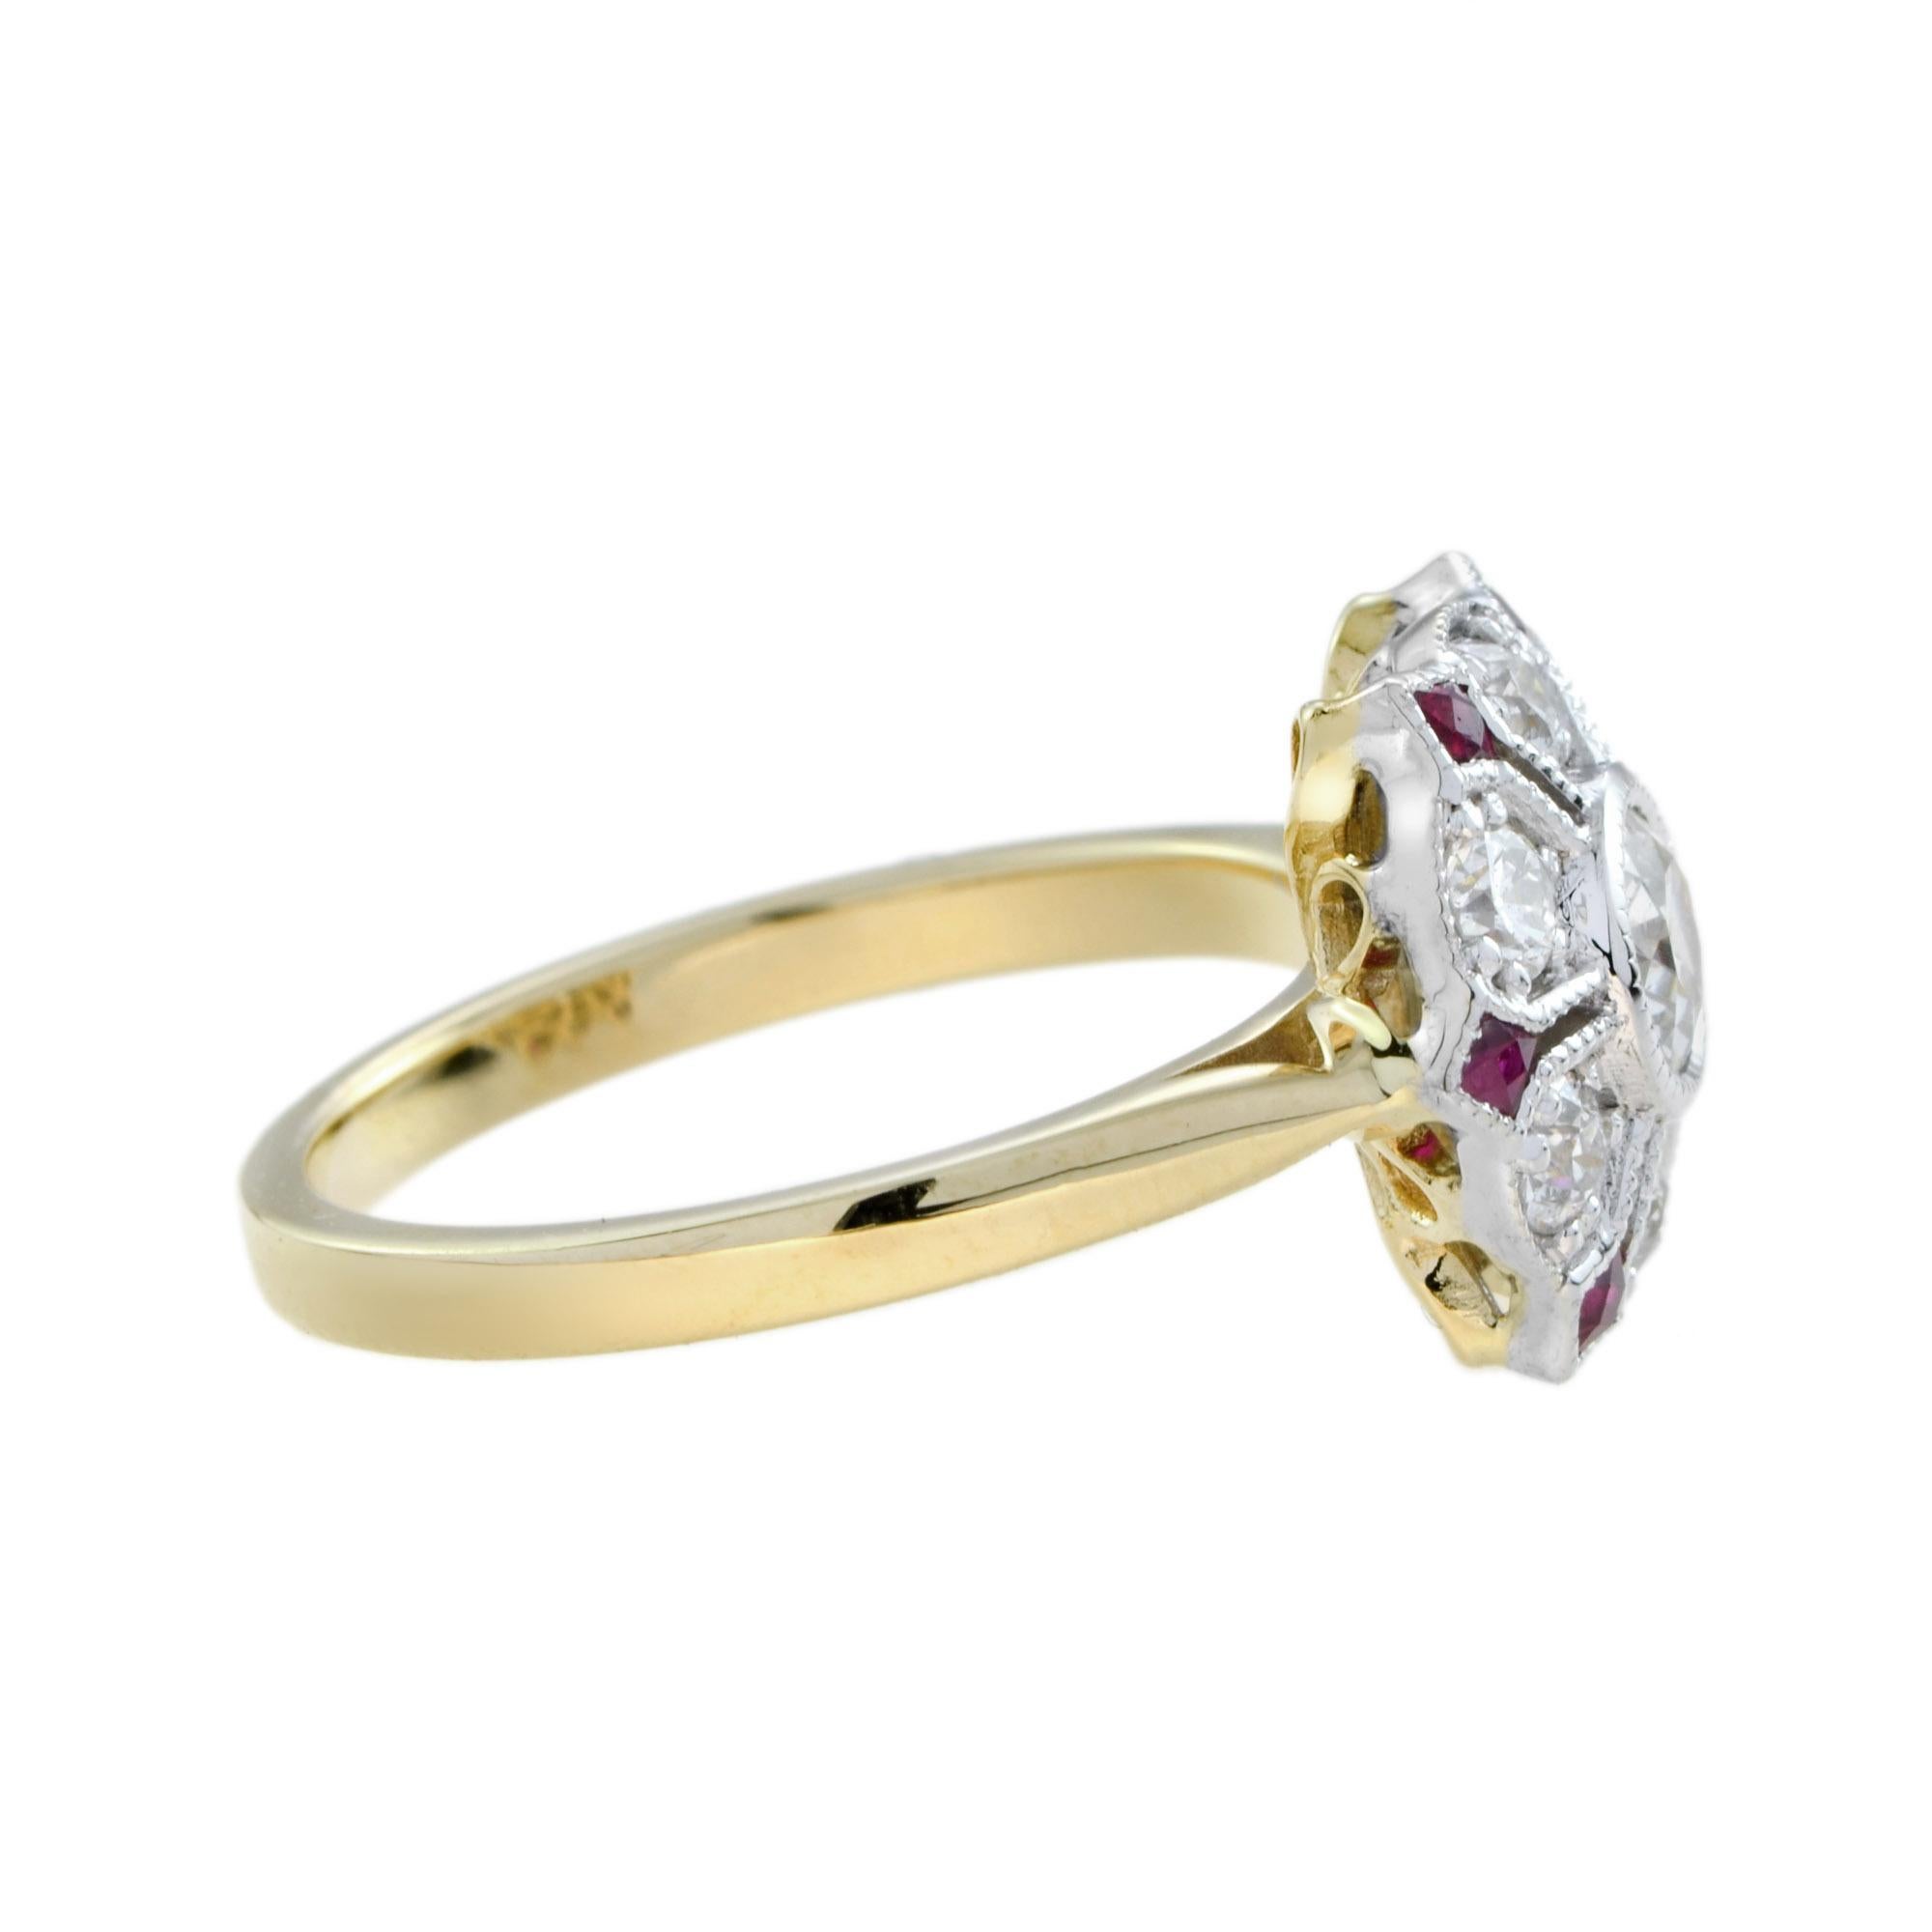 For Sale:  Diamond and Ruby Antique Style Floral Ring in 18k White Top Yellow Gold 5